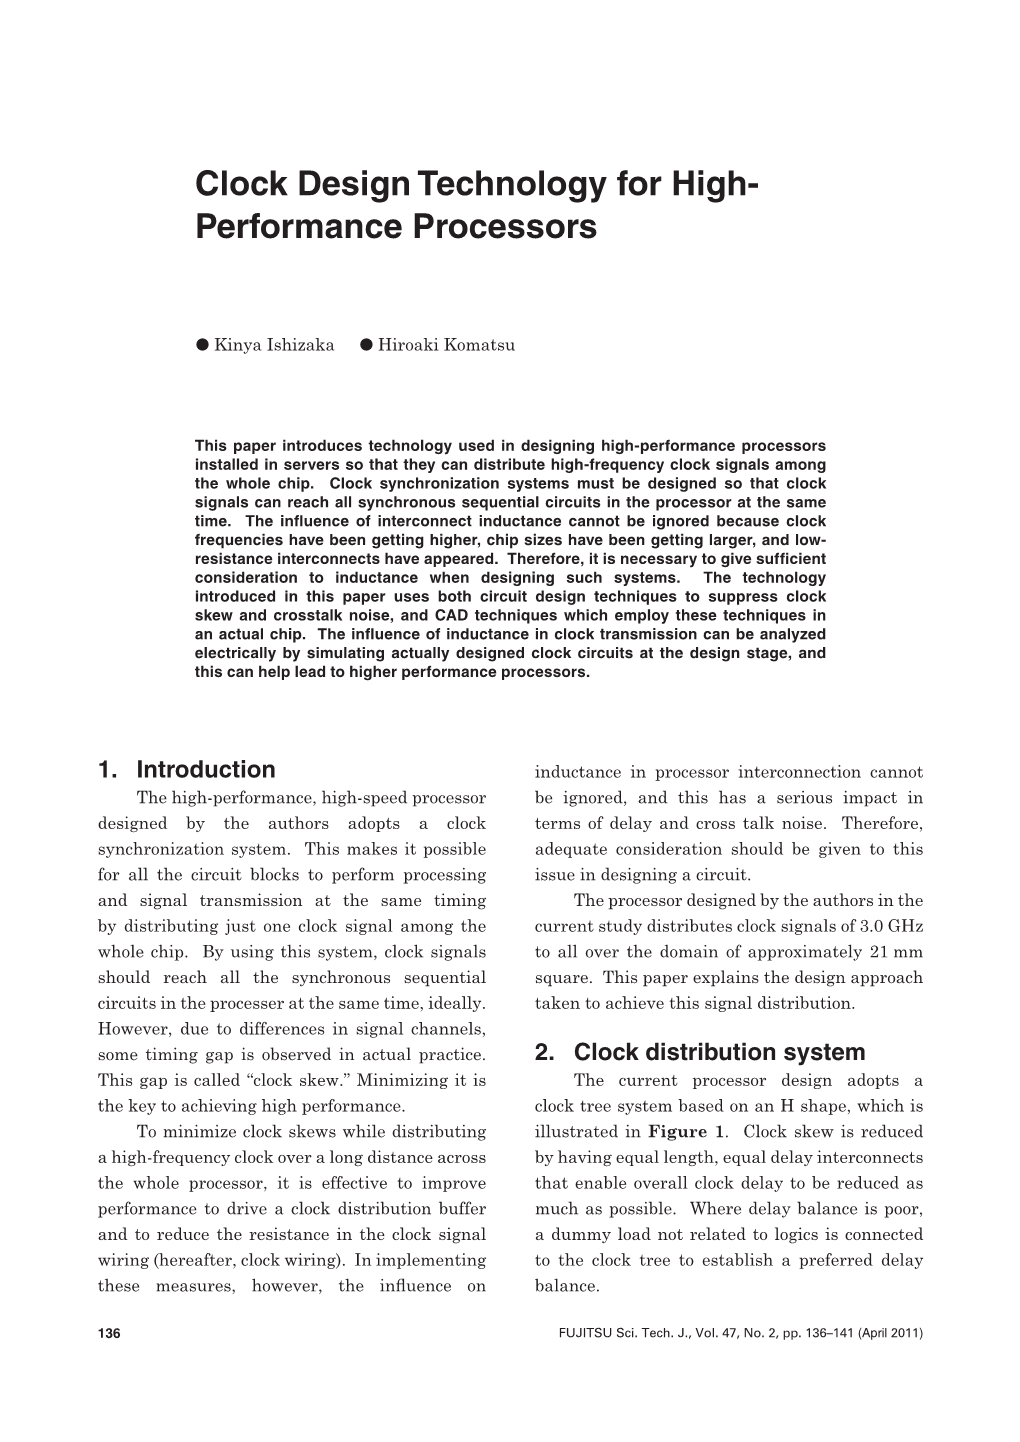 Clock Design Technology for High-Performance Processors